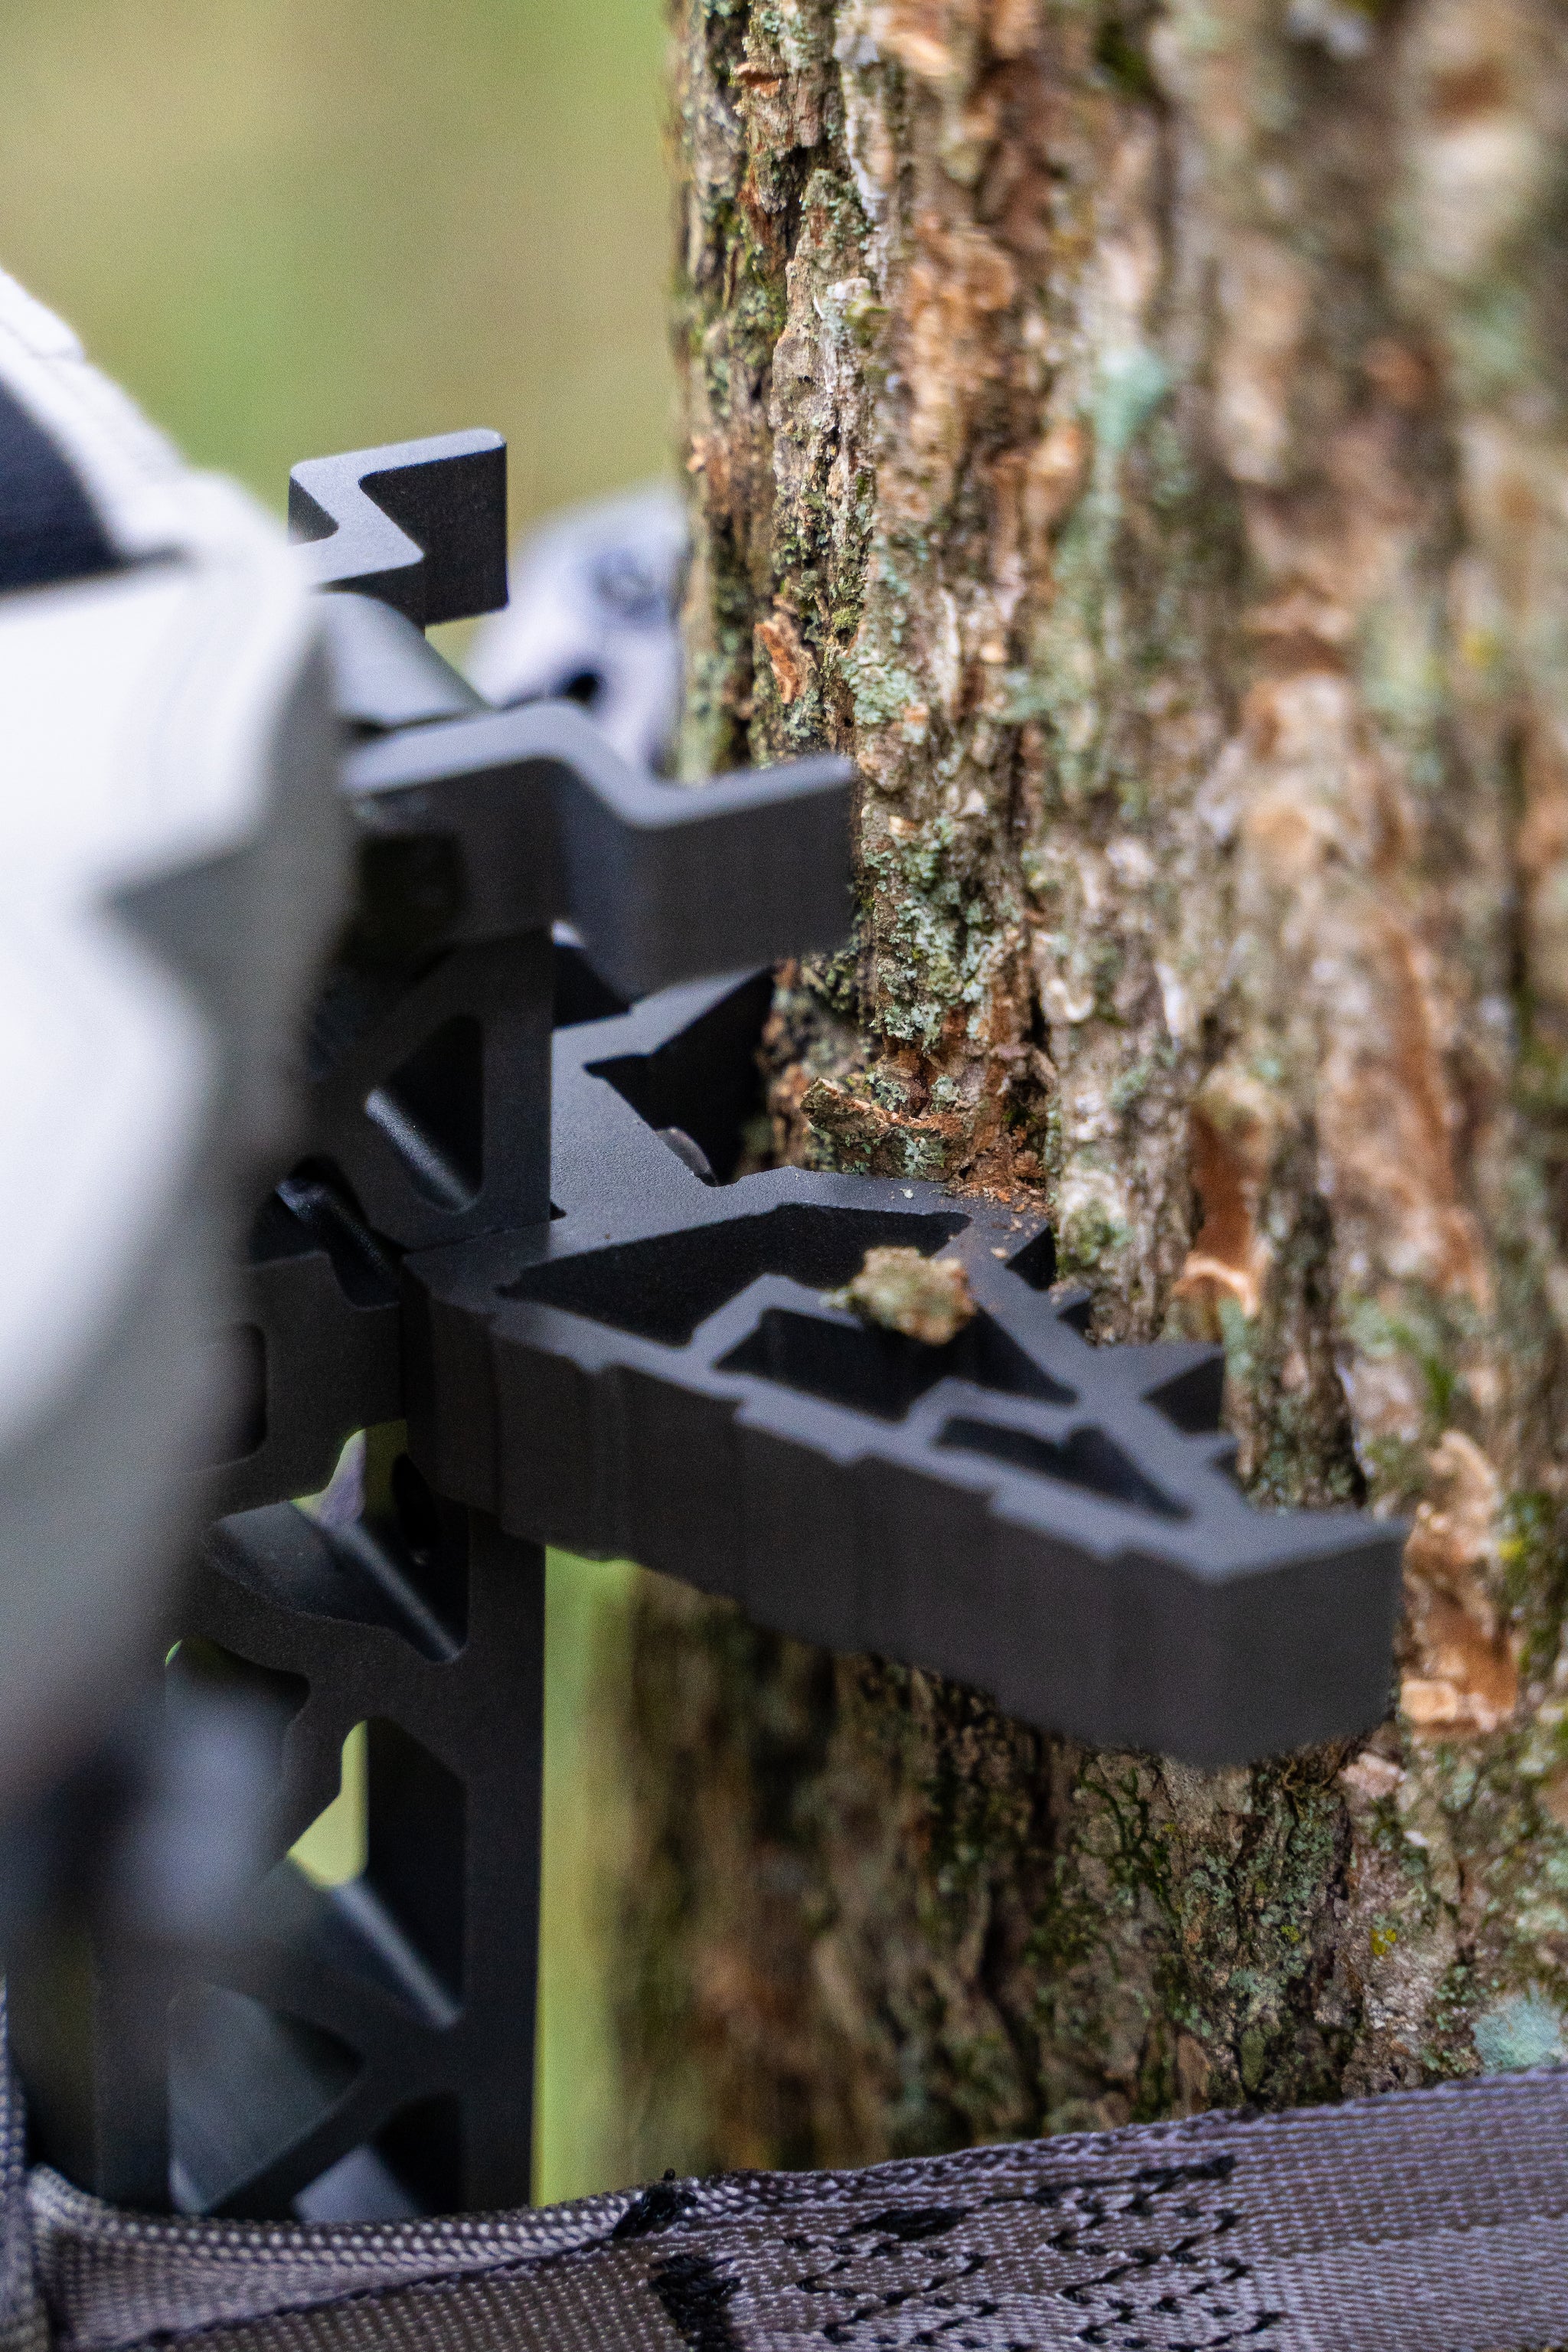 D'Acquisto Series Hang-On .5 / Public Land Stand ™